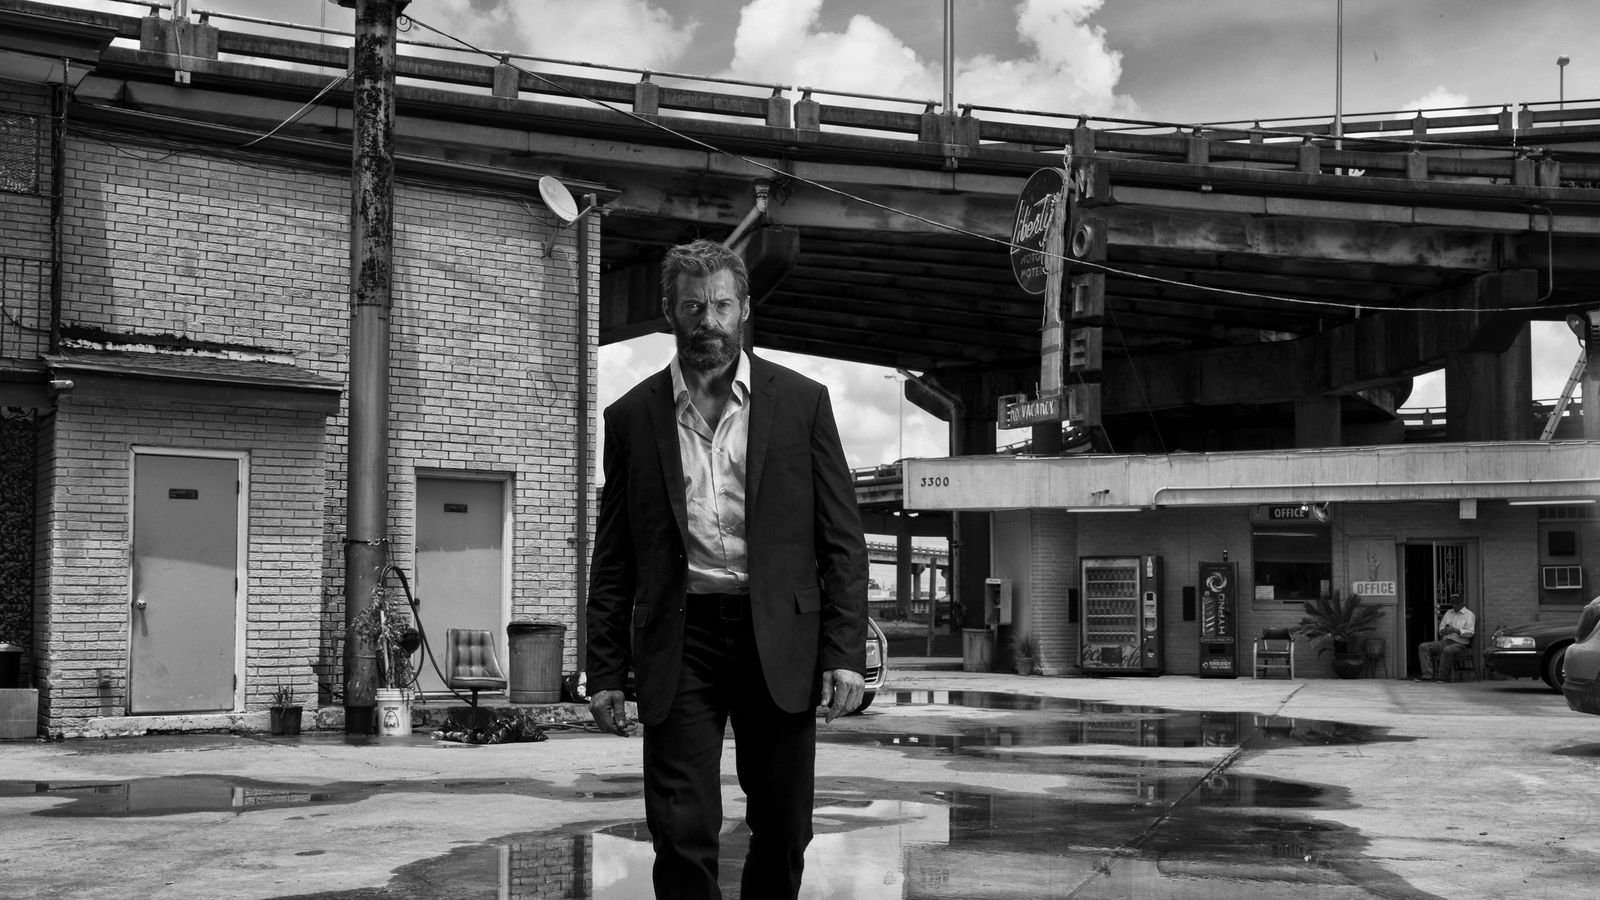 image for Logan’s black-and-white cut is coming to theaters on May 16th